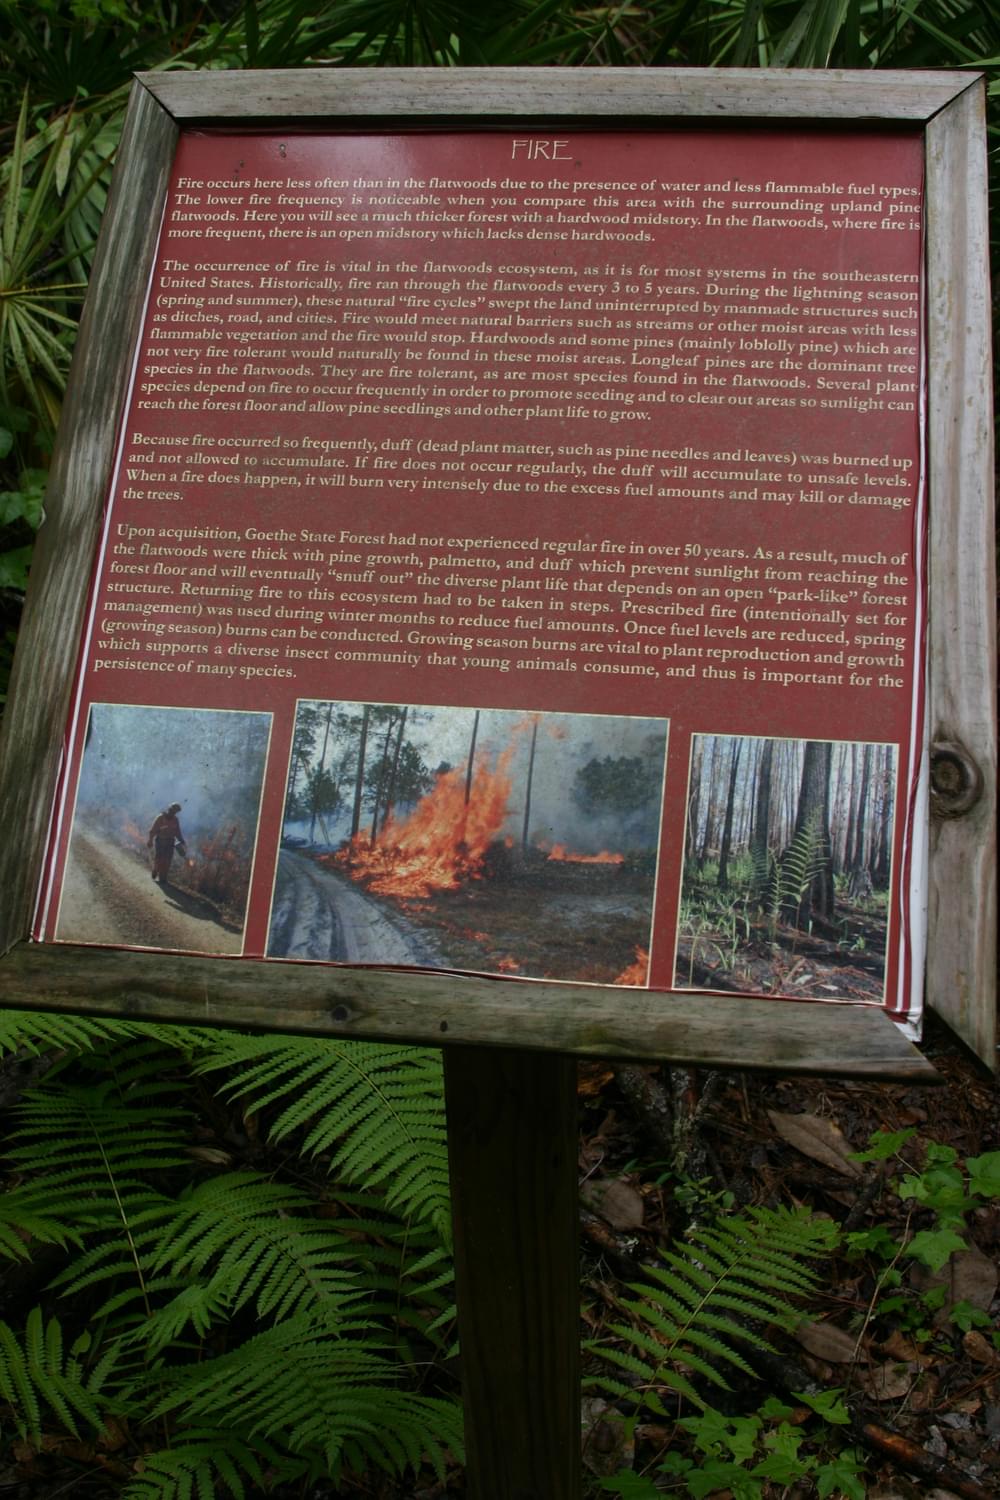 The natural history of fire is the topic on Big Cypress Trail in Goethe State Forest; central Florida